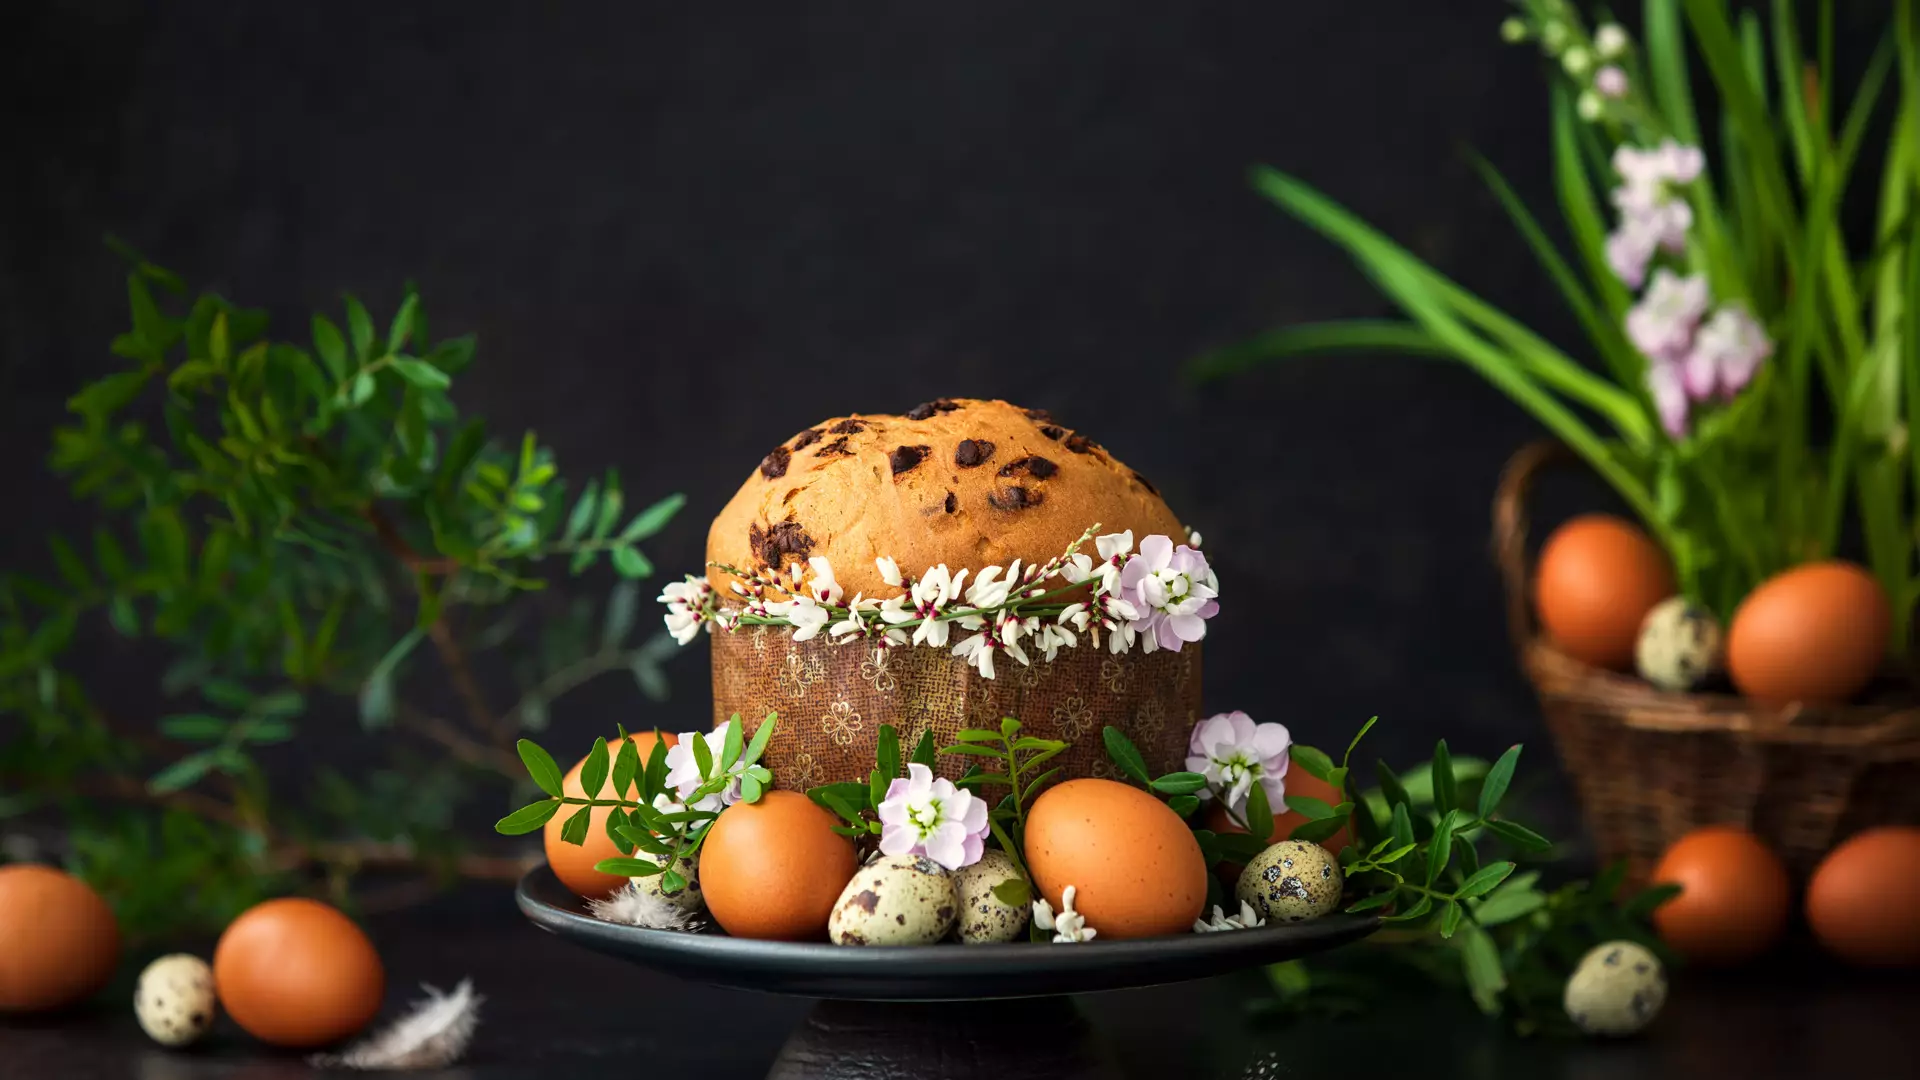 The Easter Supra – An Ancient Georgian Tradition